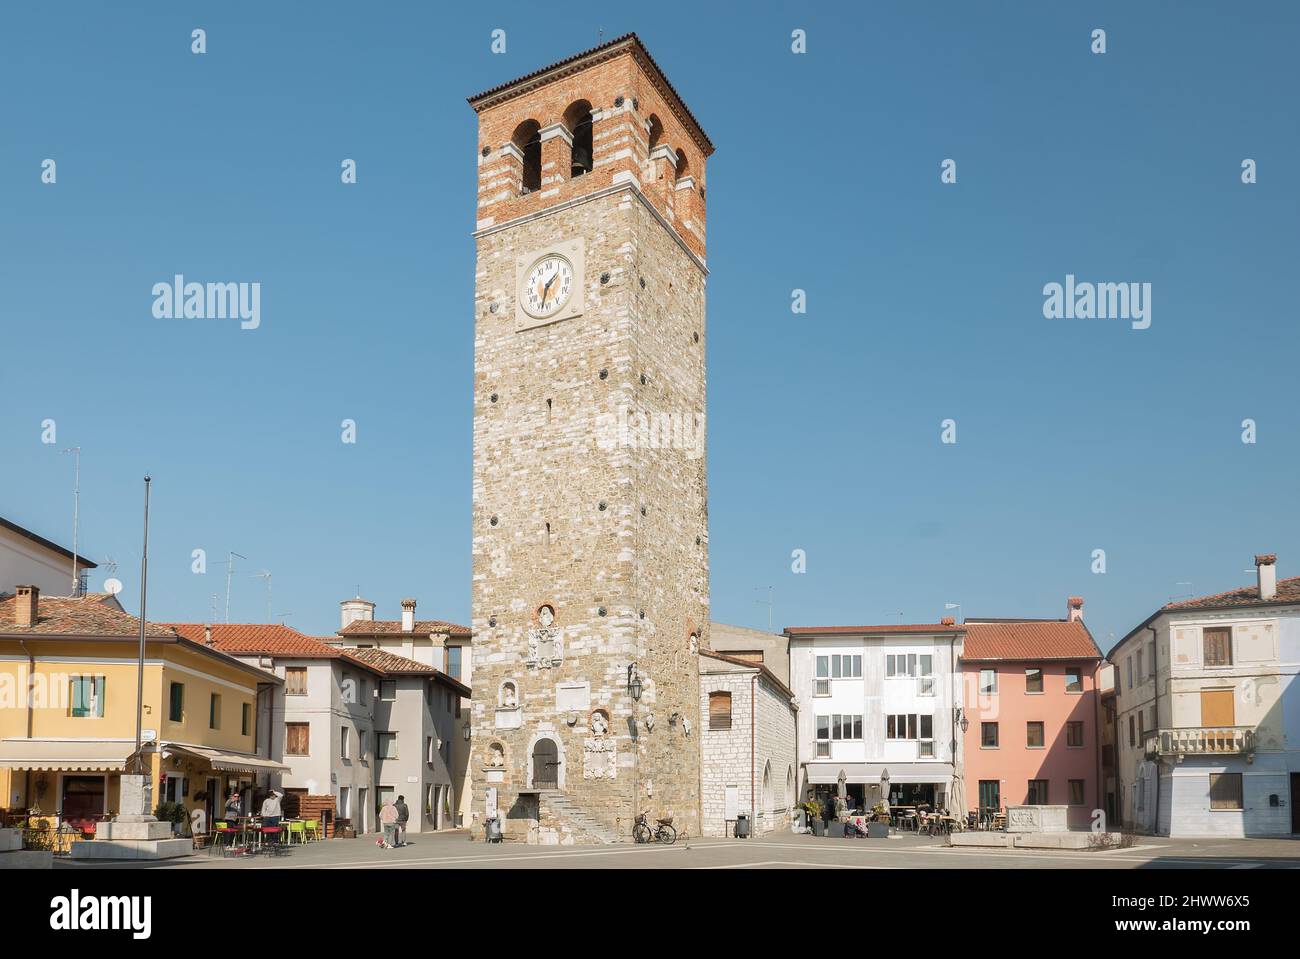 Marano Lagunare, Italy (6th March 2022) - The ancient and typical Piazza Vittorio Emanuele II Square with its 'Torre Millenaria' medieval tower Stock Photo